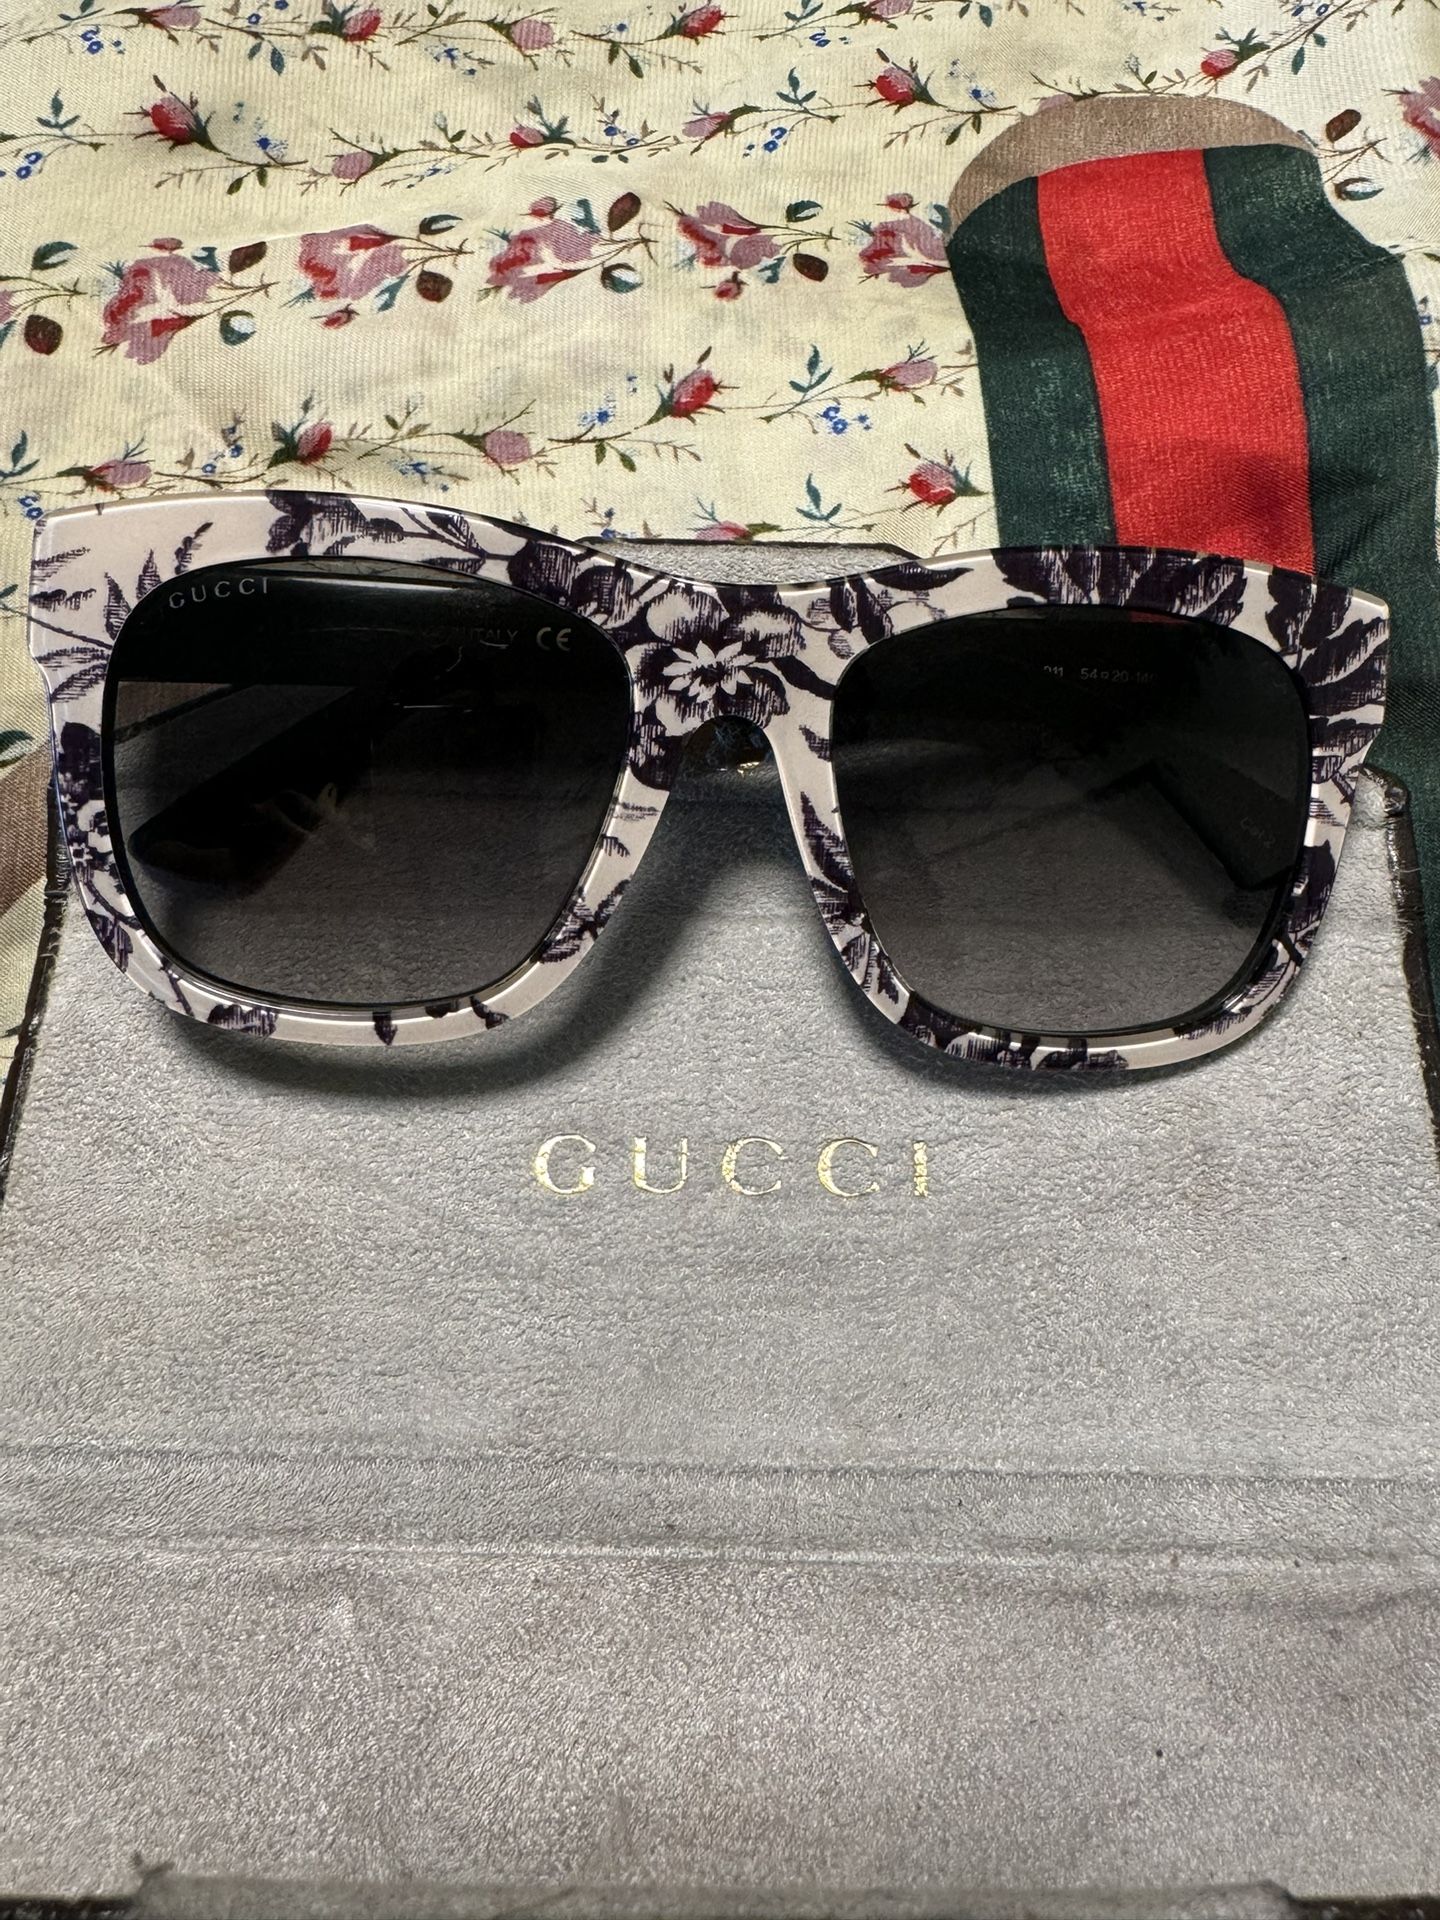 Gucci Japanese Collection Sunglasses 